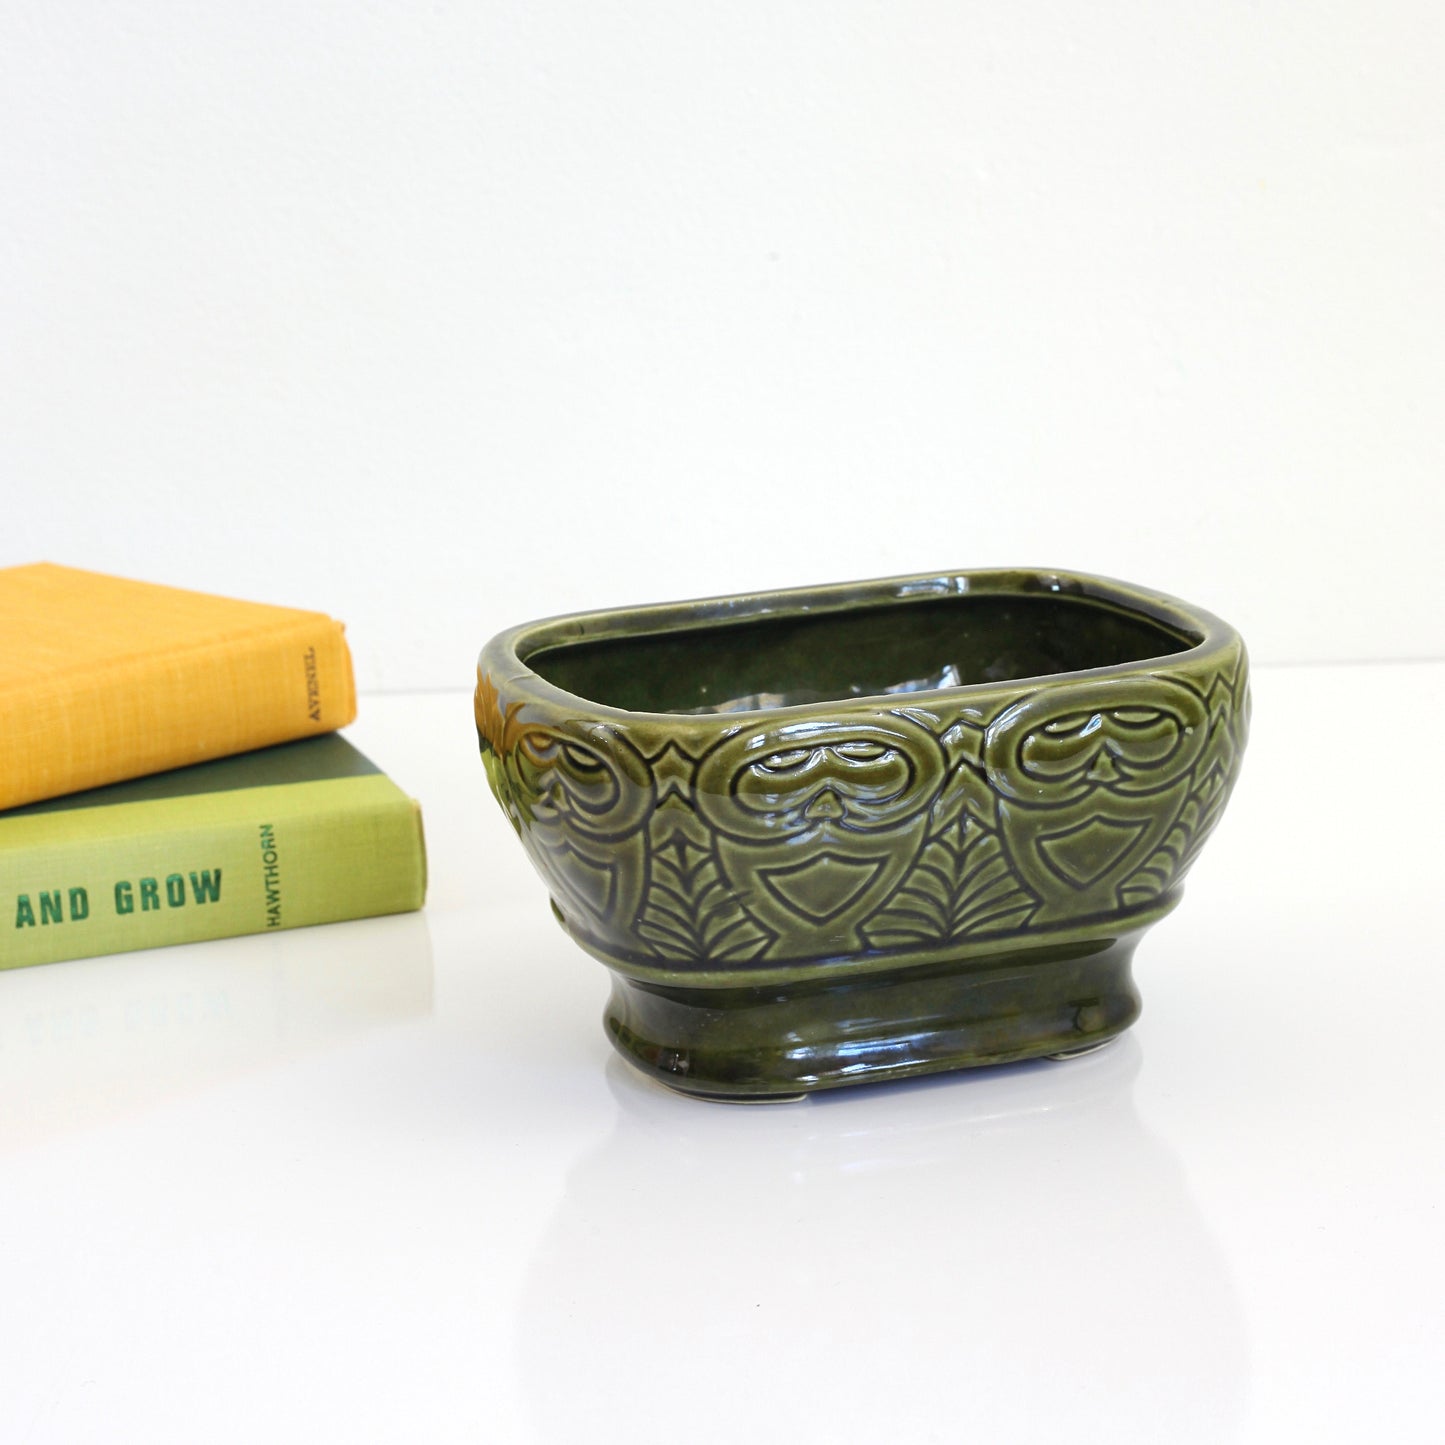 SOLD - Vintage Mossy Green USA Pottery Planter